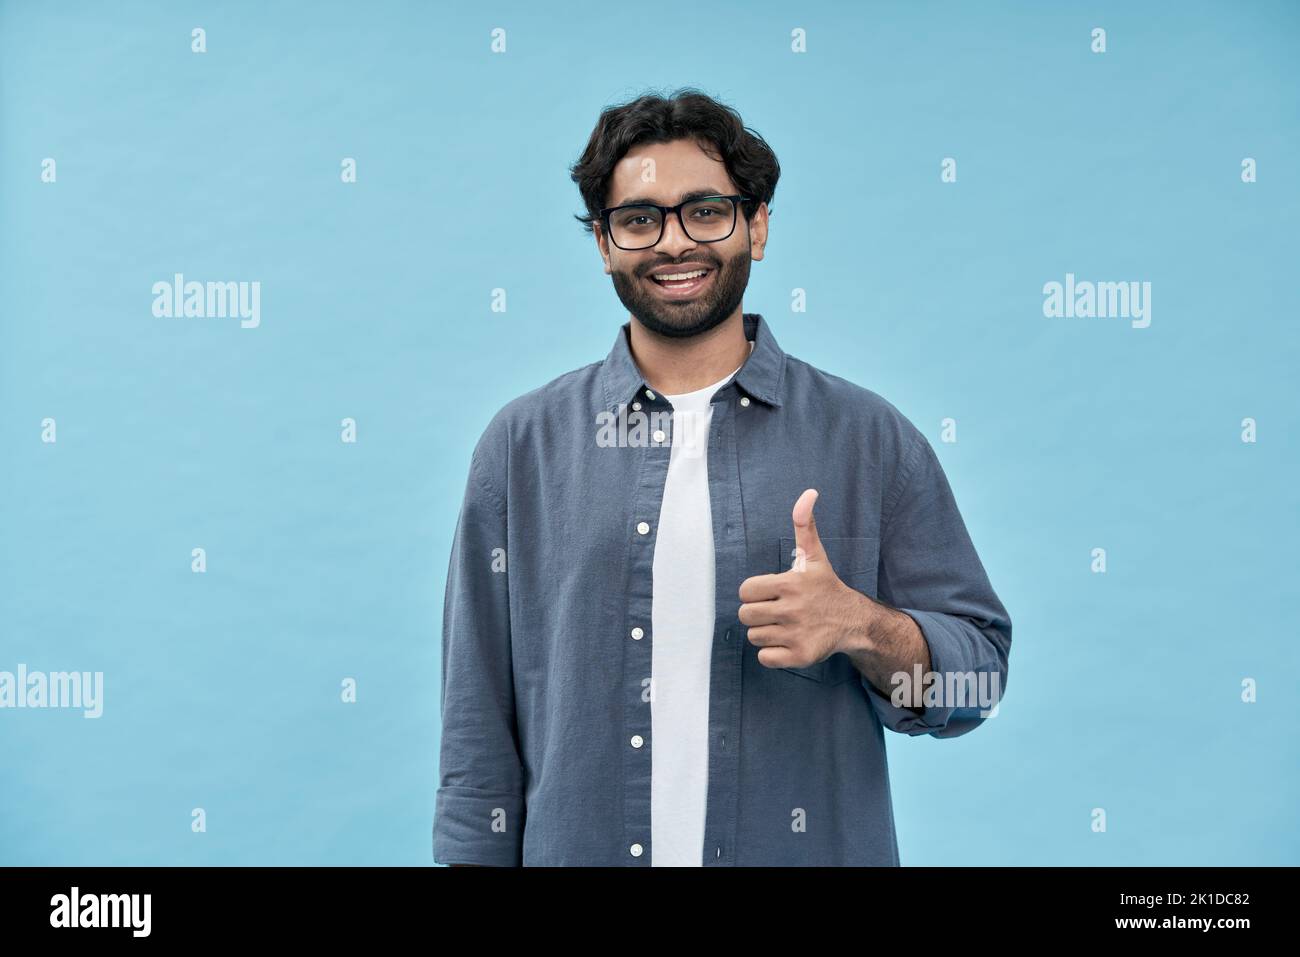 Smiling happy young arab man showing thumbs up isolated on blue background. Stock Photo